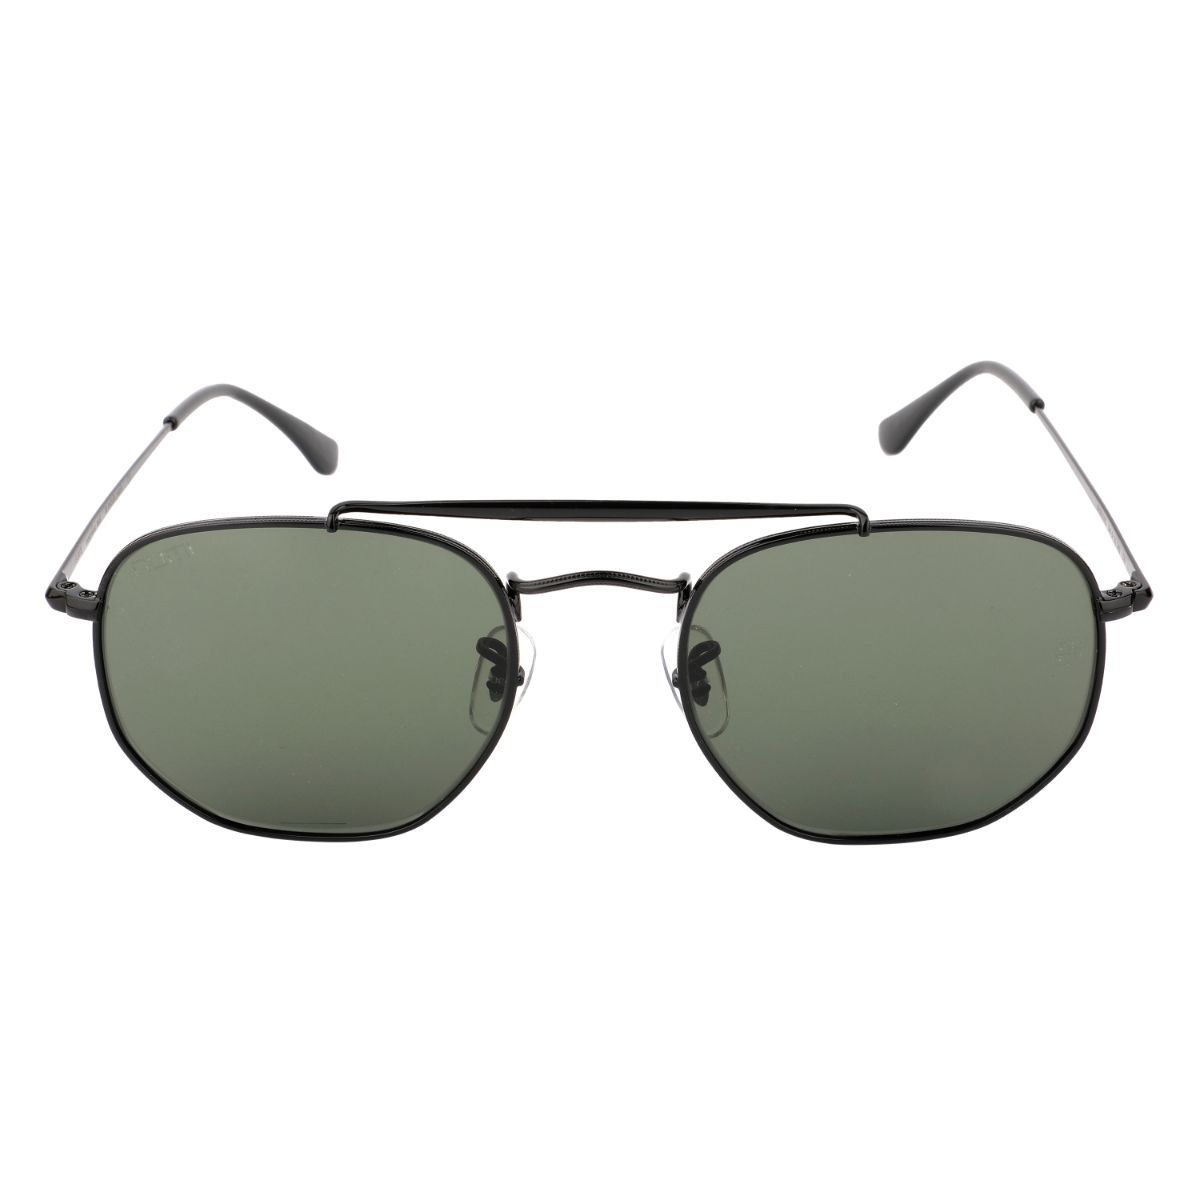 NUMI Green Square UV Protected Sunglasses N18151SCL6